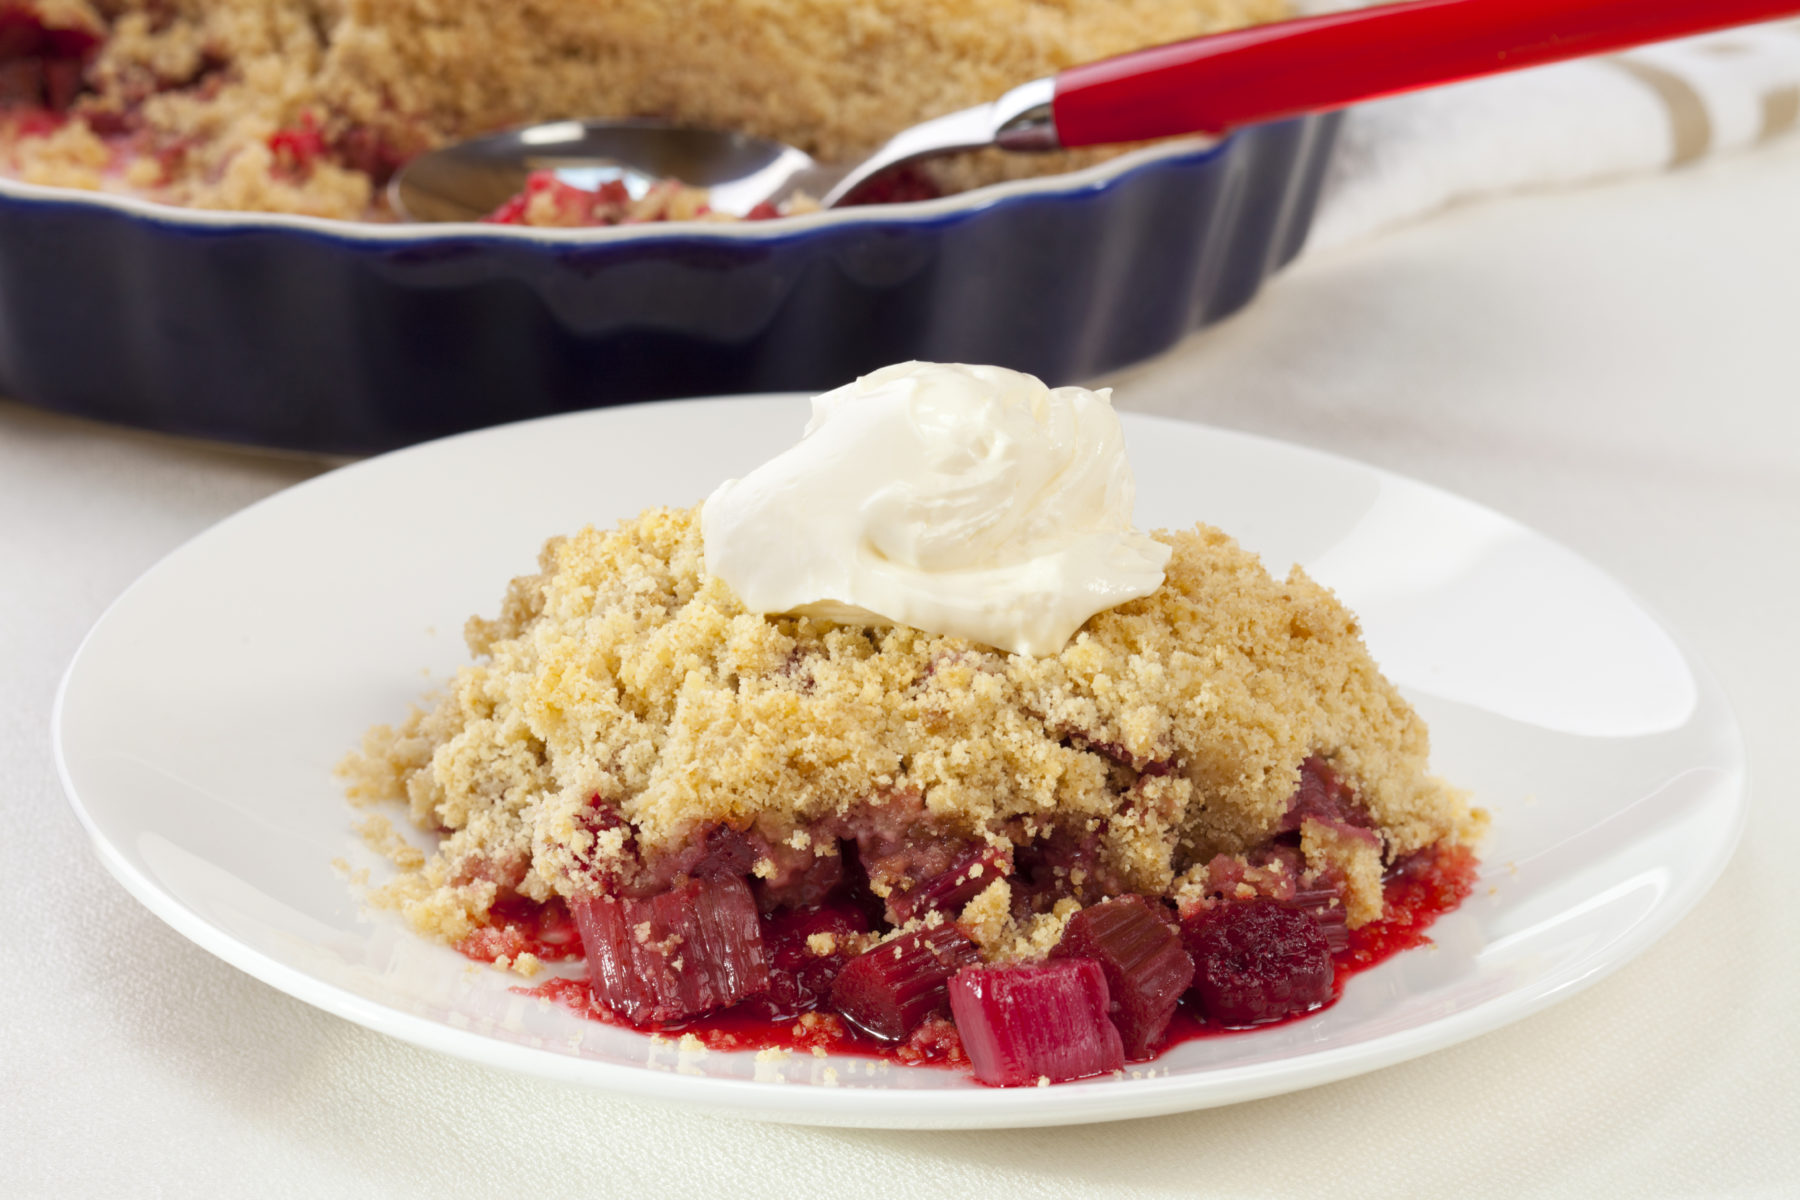 Rhubarb and Strawberry Crisp with Vanilla Whip